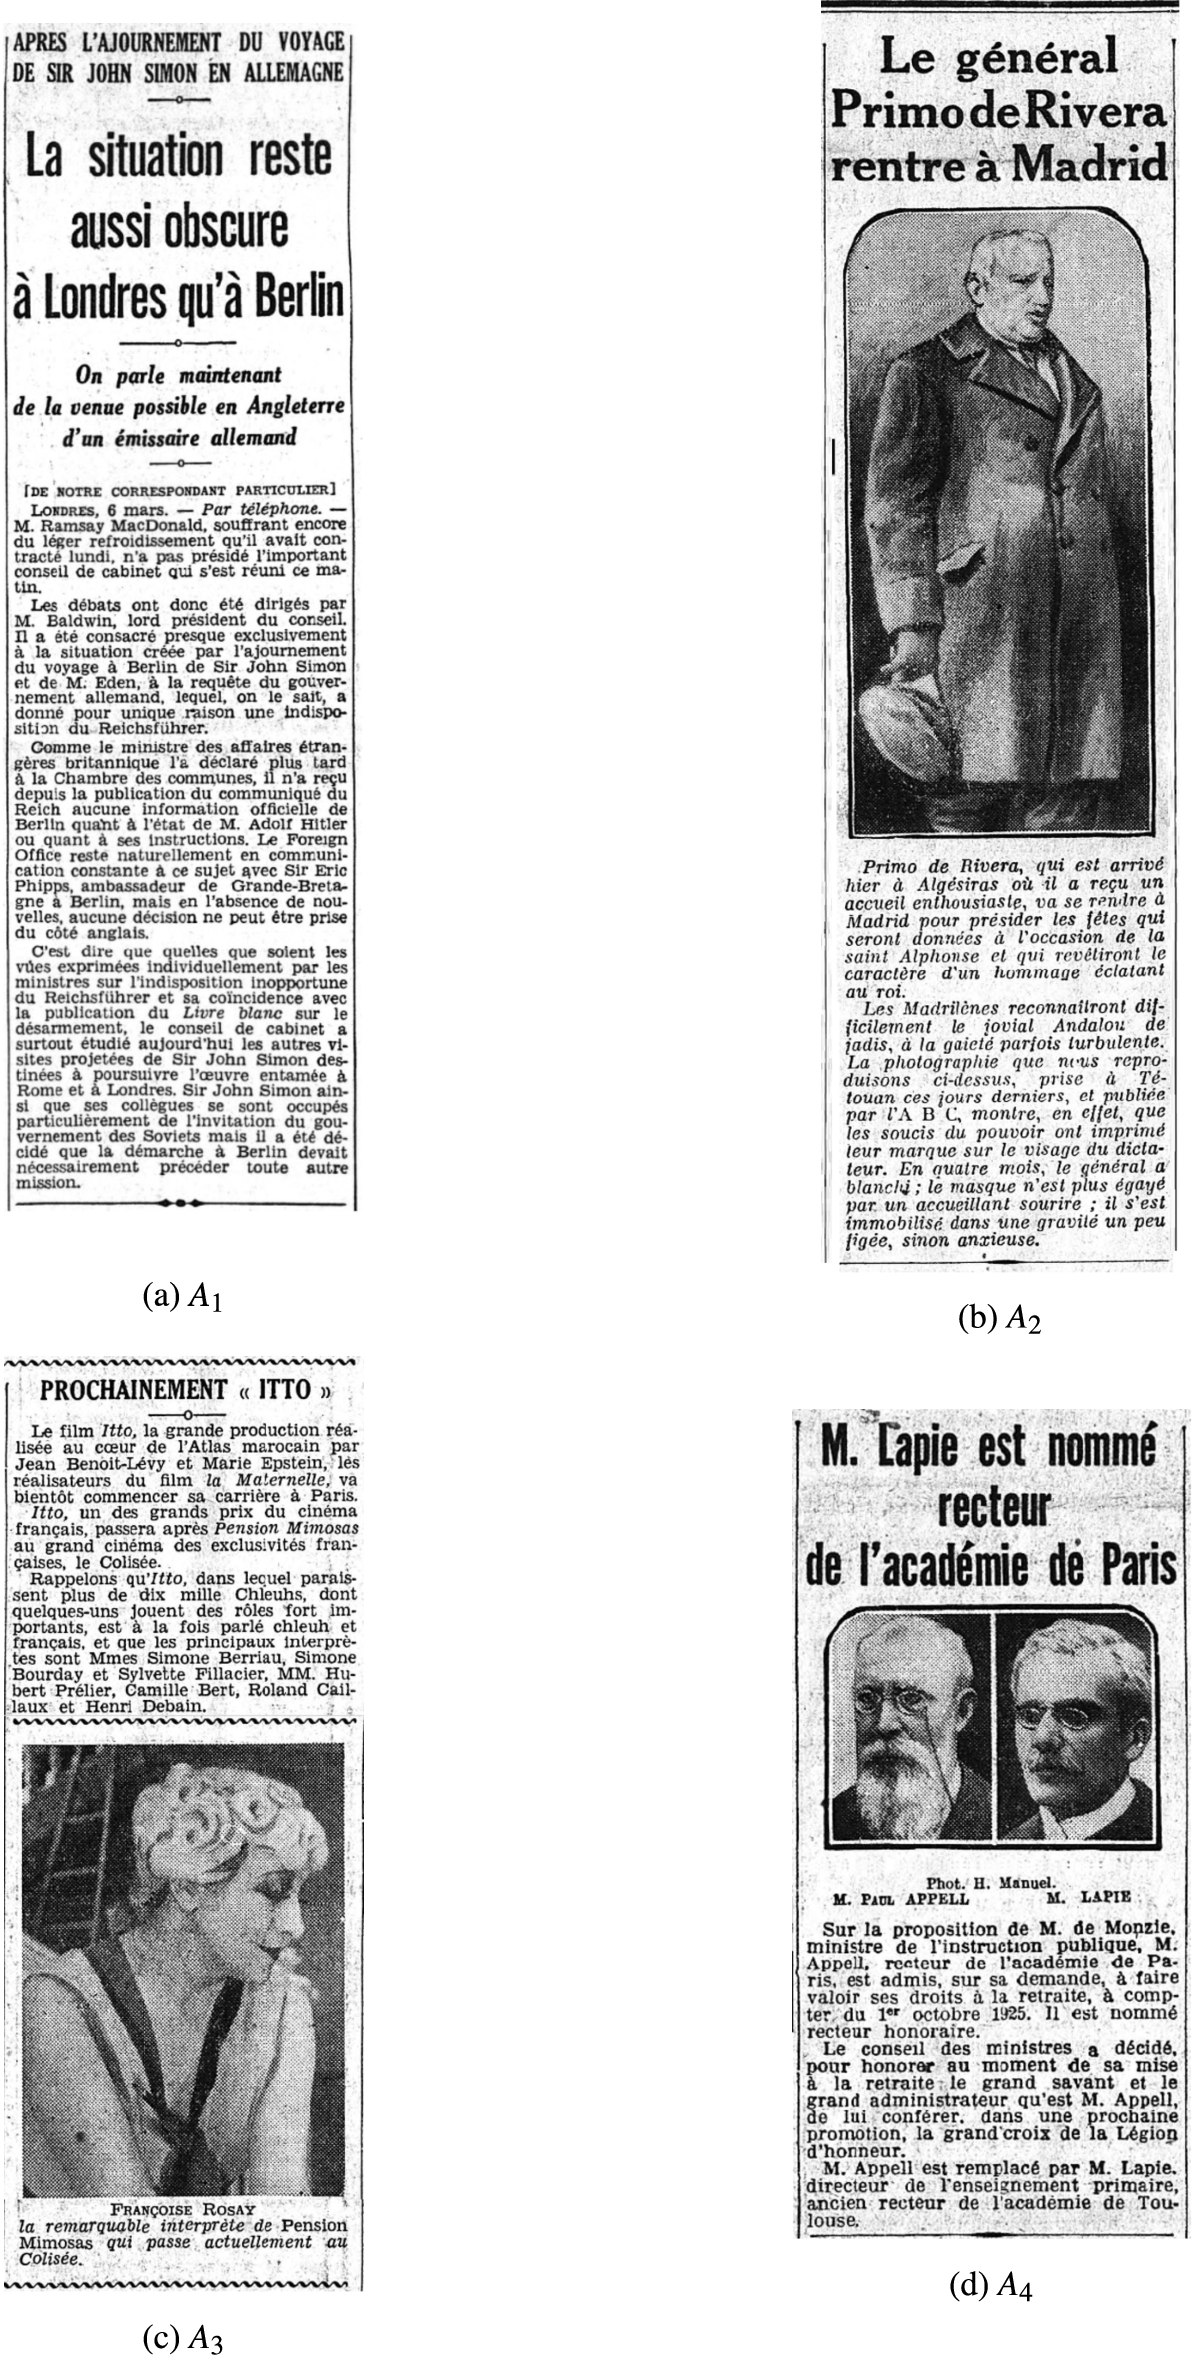 Example of articles from Le Matin.